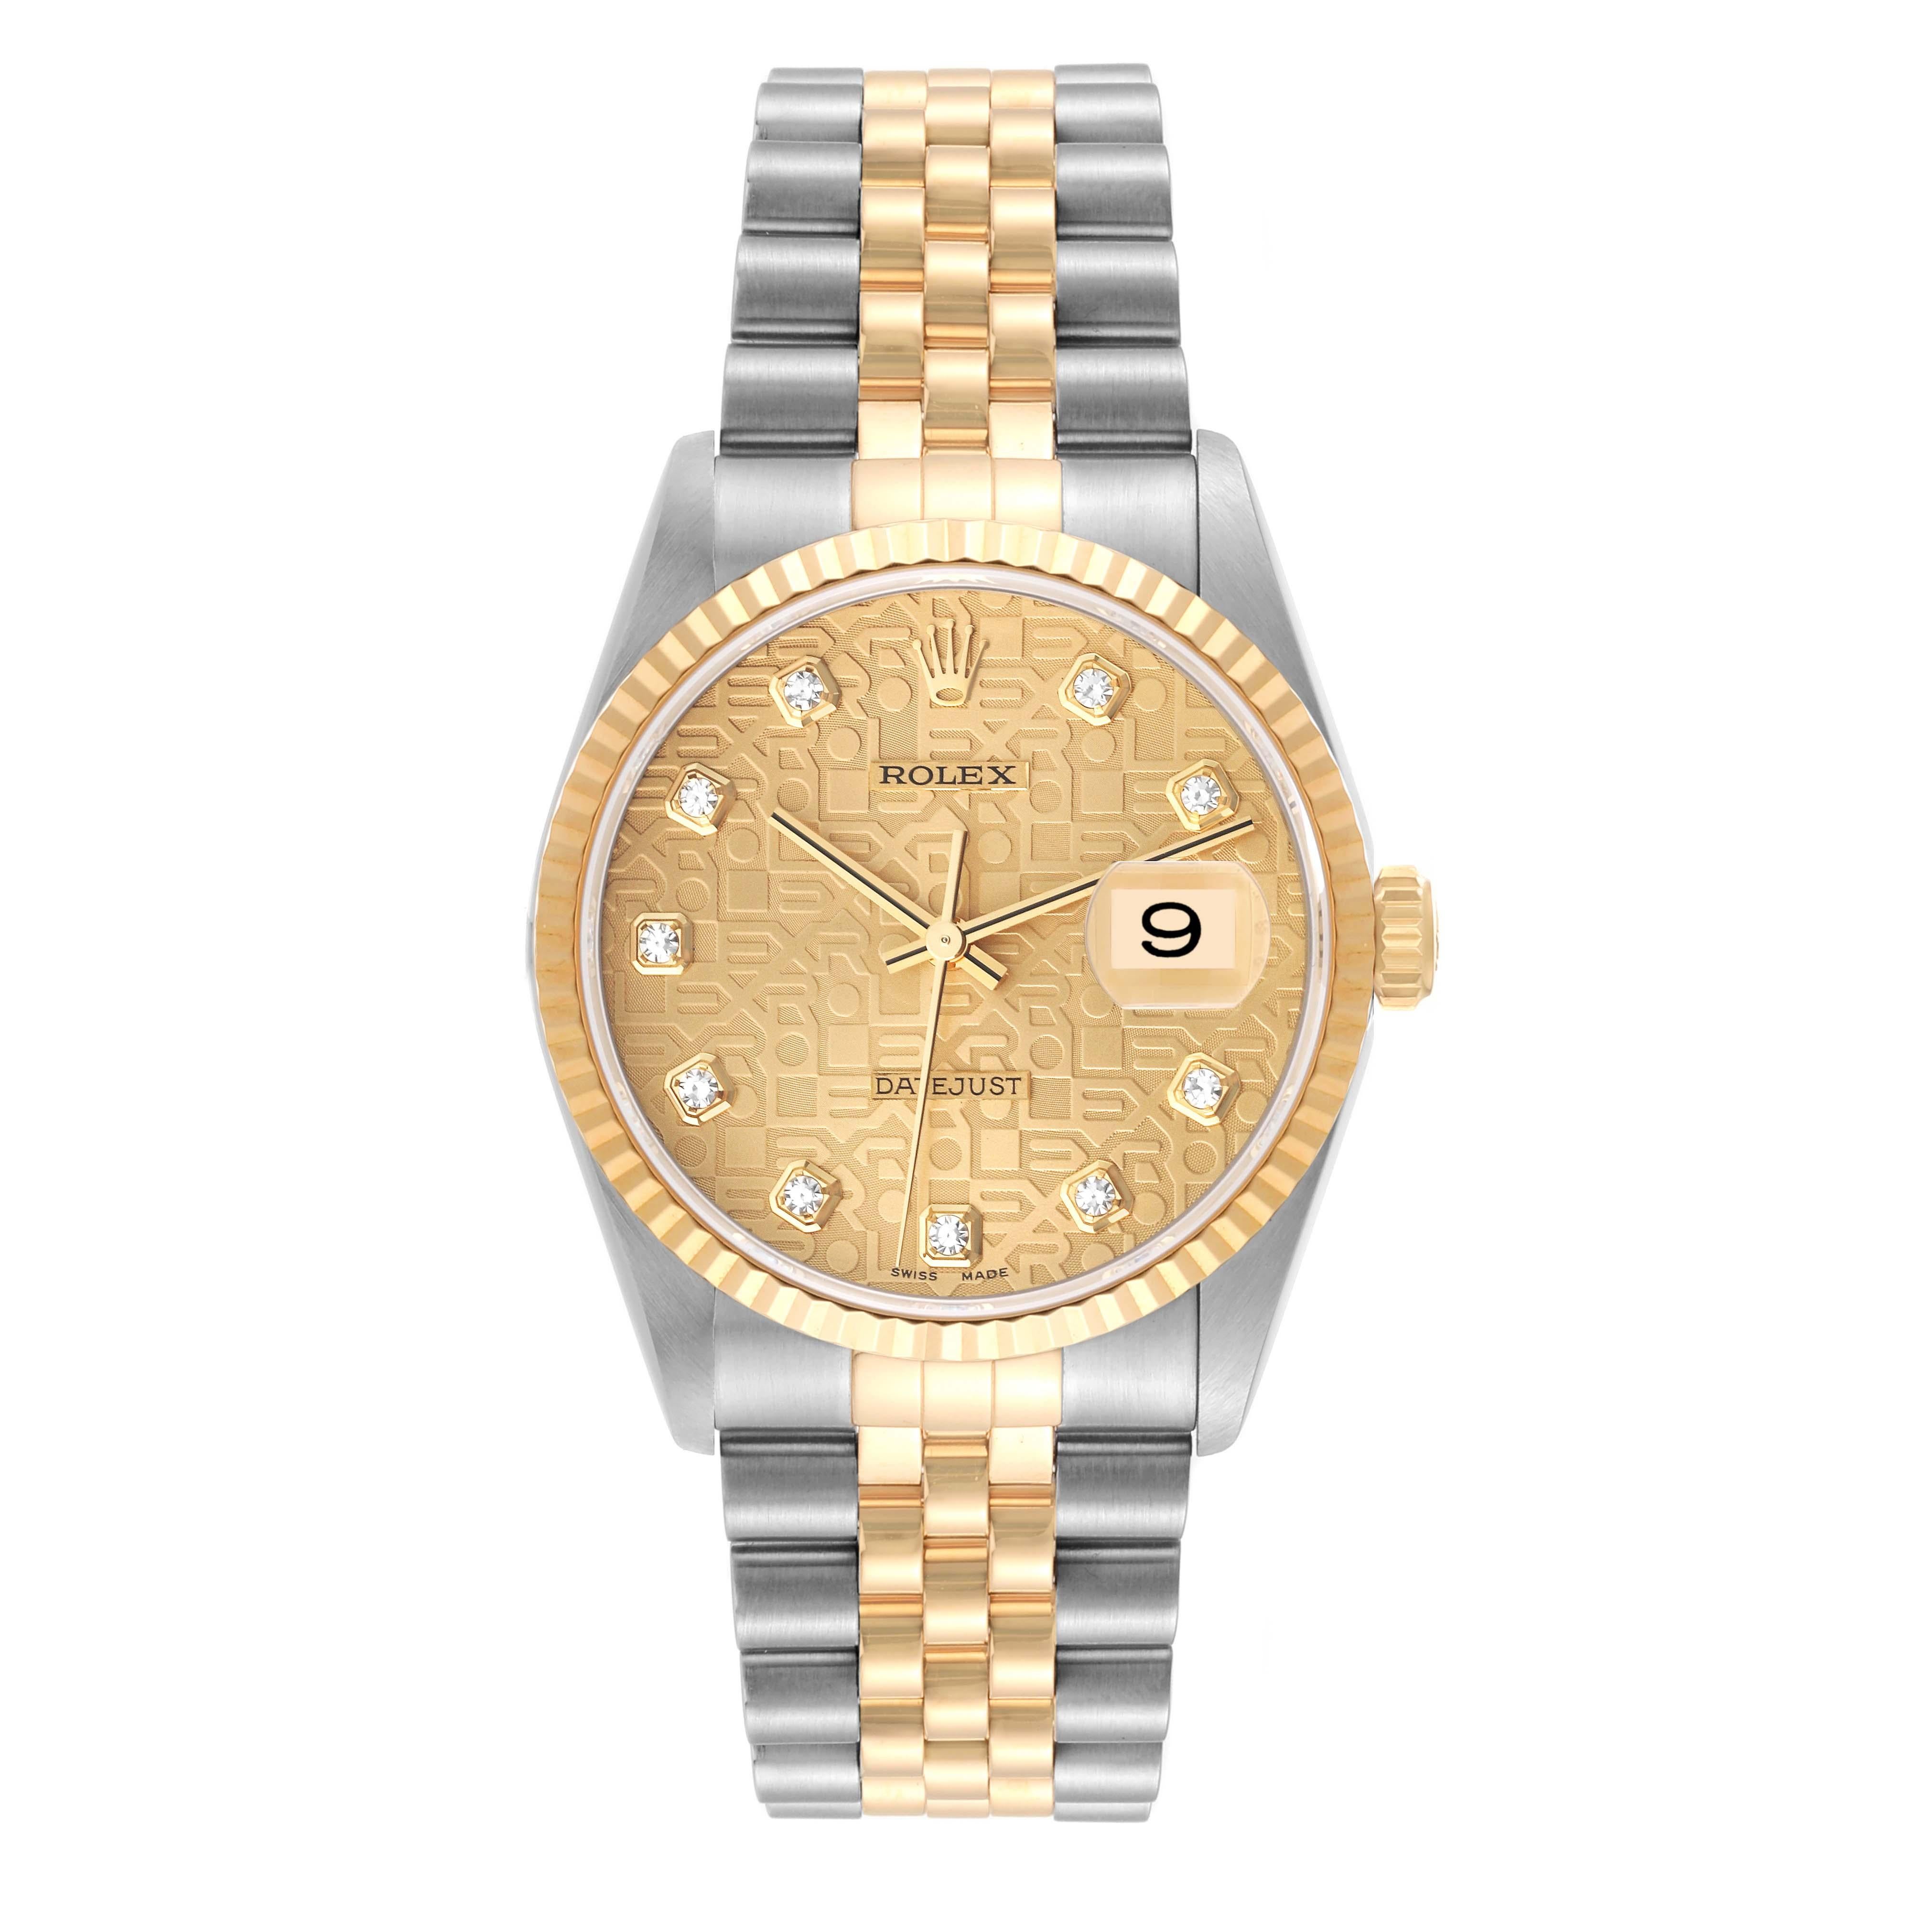 Rolex Datejust Steel Yellow Gold Diamond Anniversary Dial Mens Watch 16233. Officially certified chronometer automatic self-winding movement. Stainless steel case 36 mm in diameter.  Rolex logo on an 18K yellow gold crown. 18k yellow gold fluted